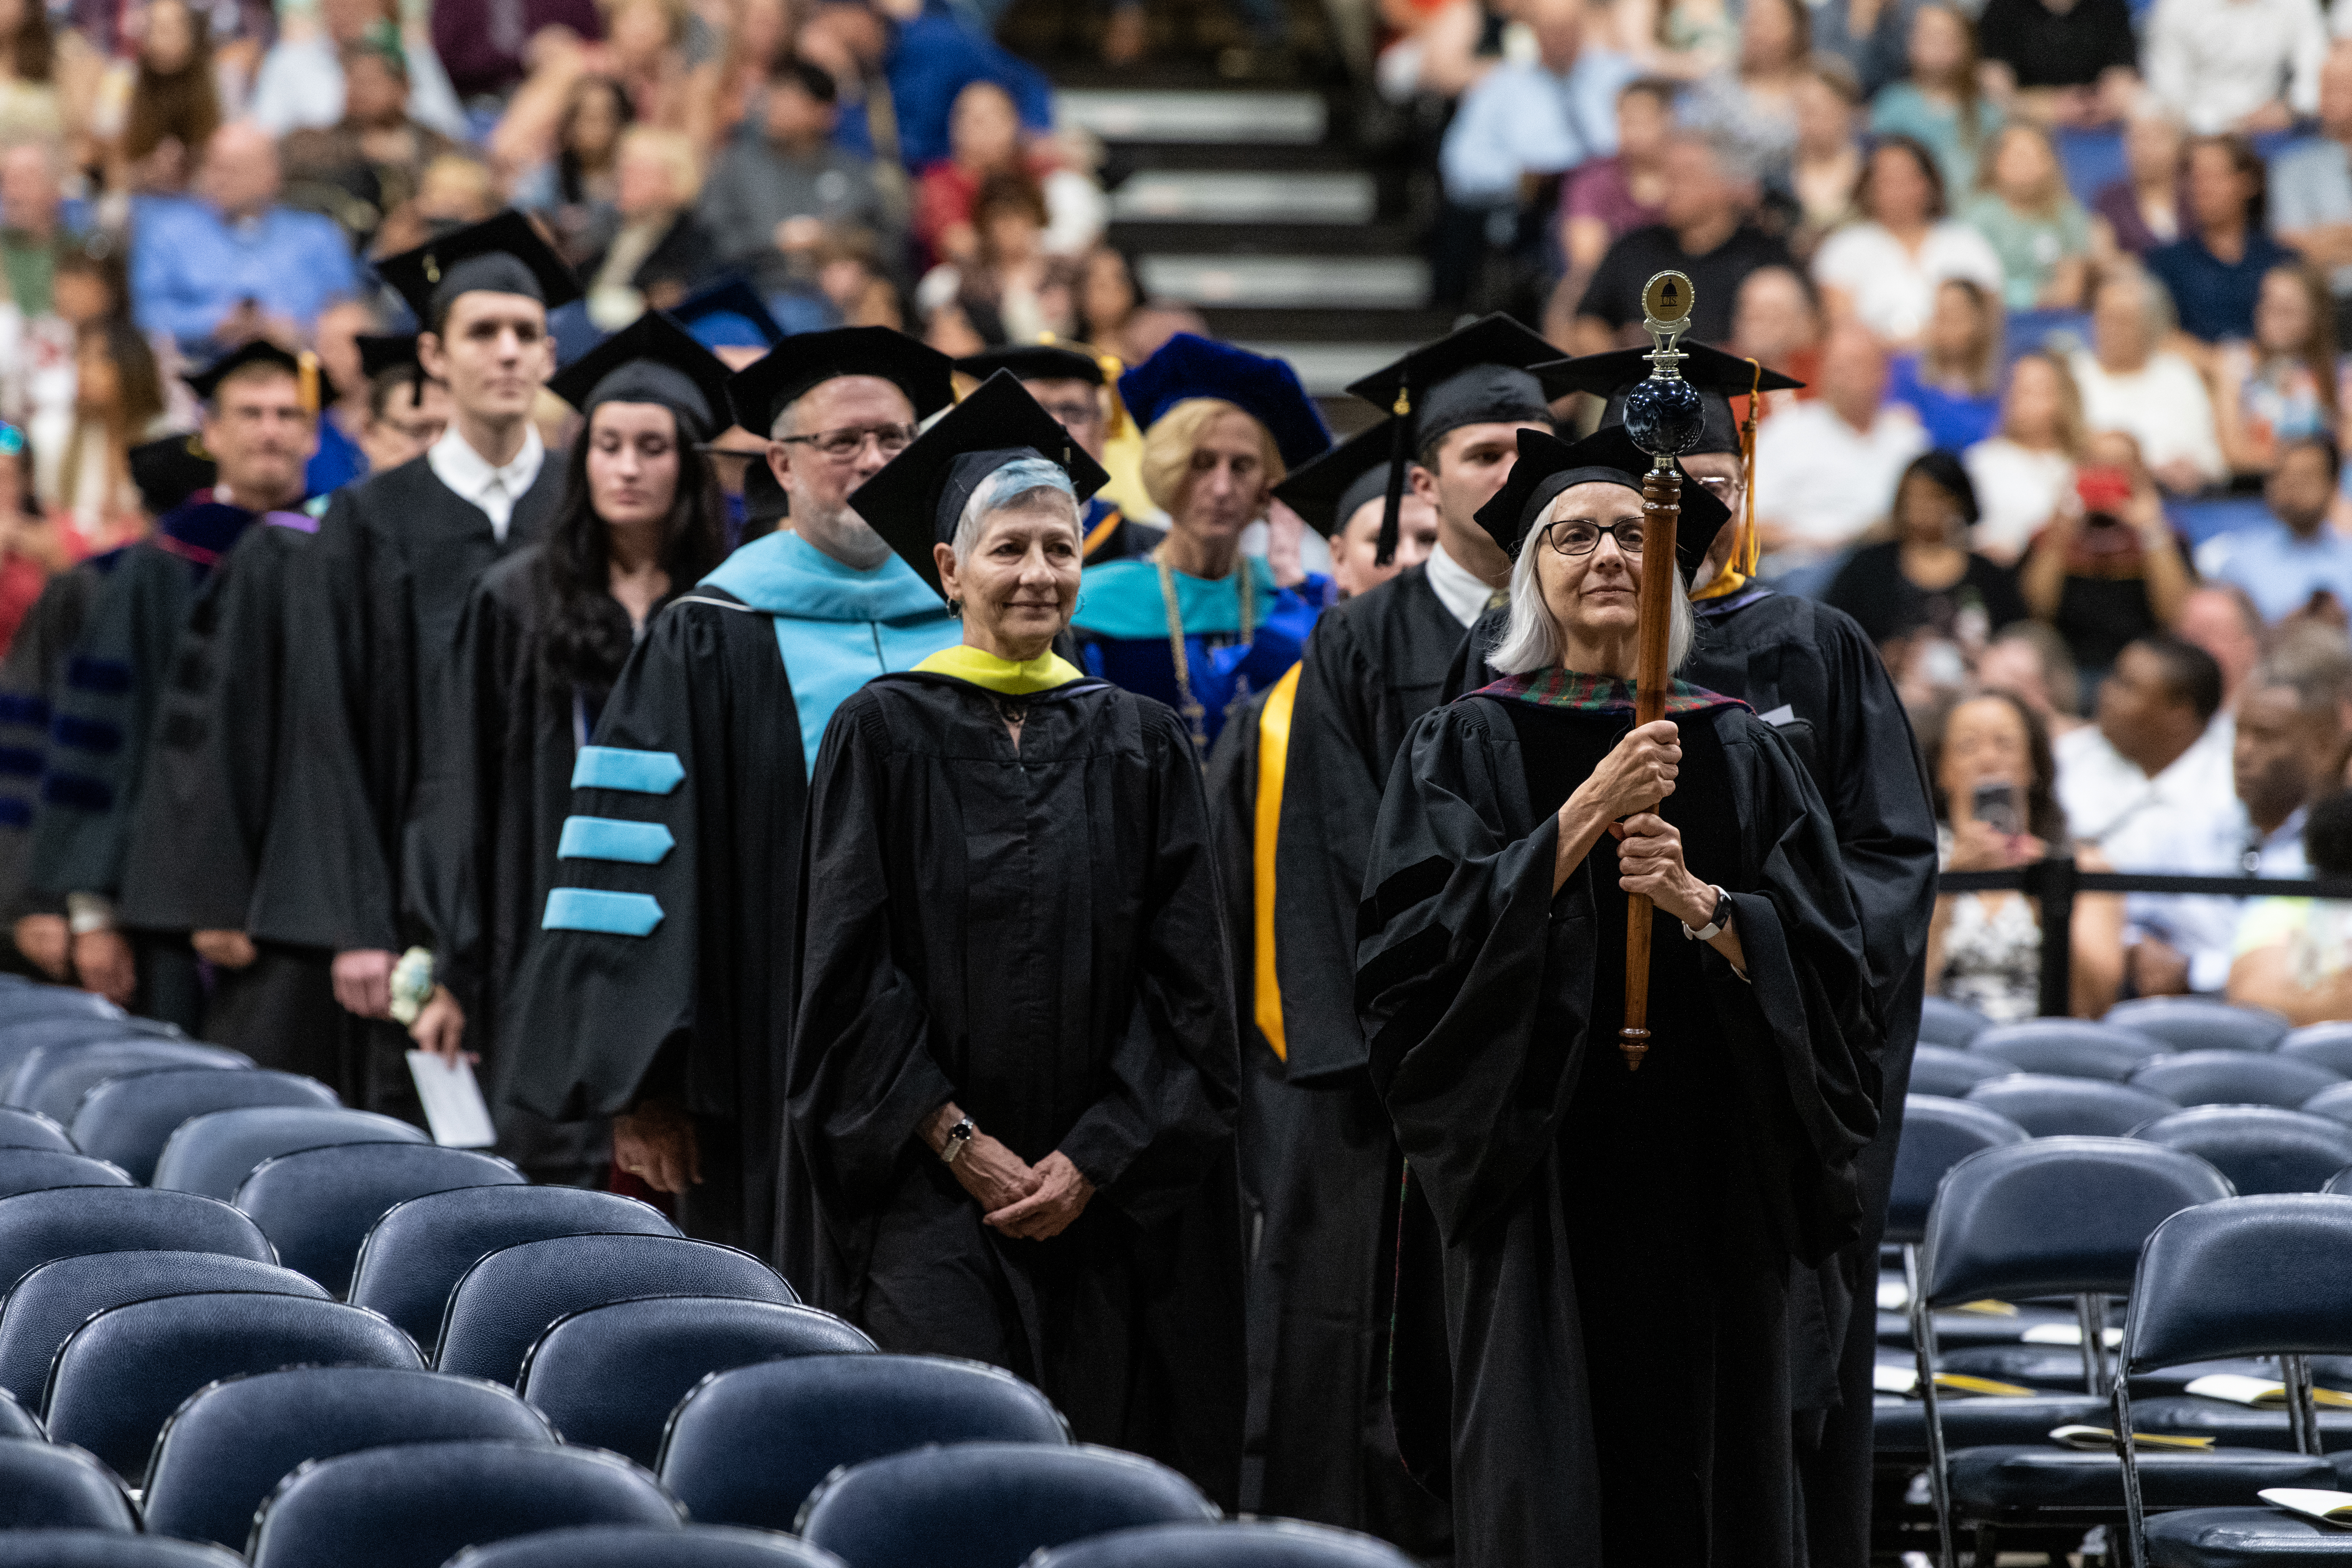 Faculty and graduate attending Commencement